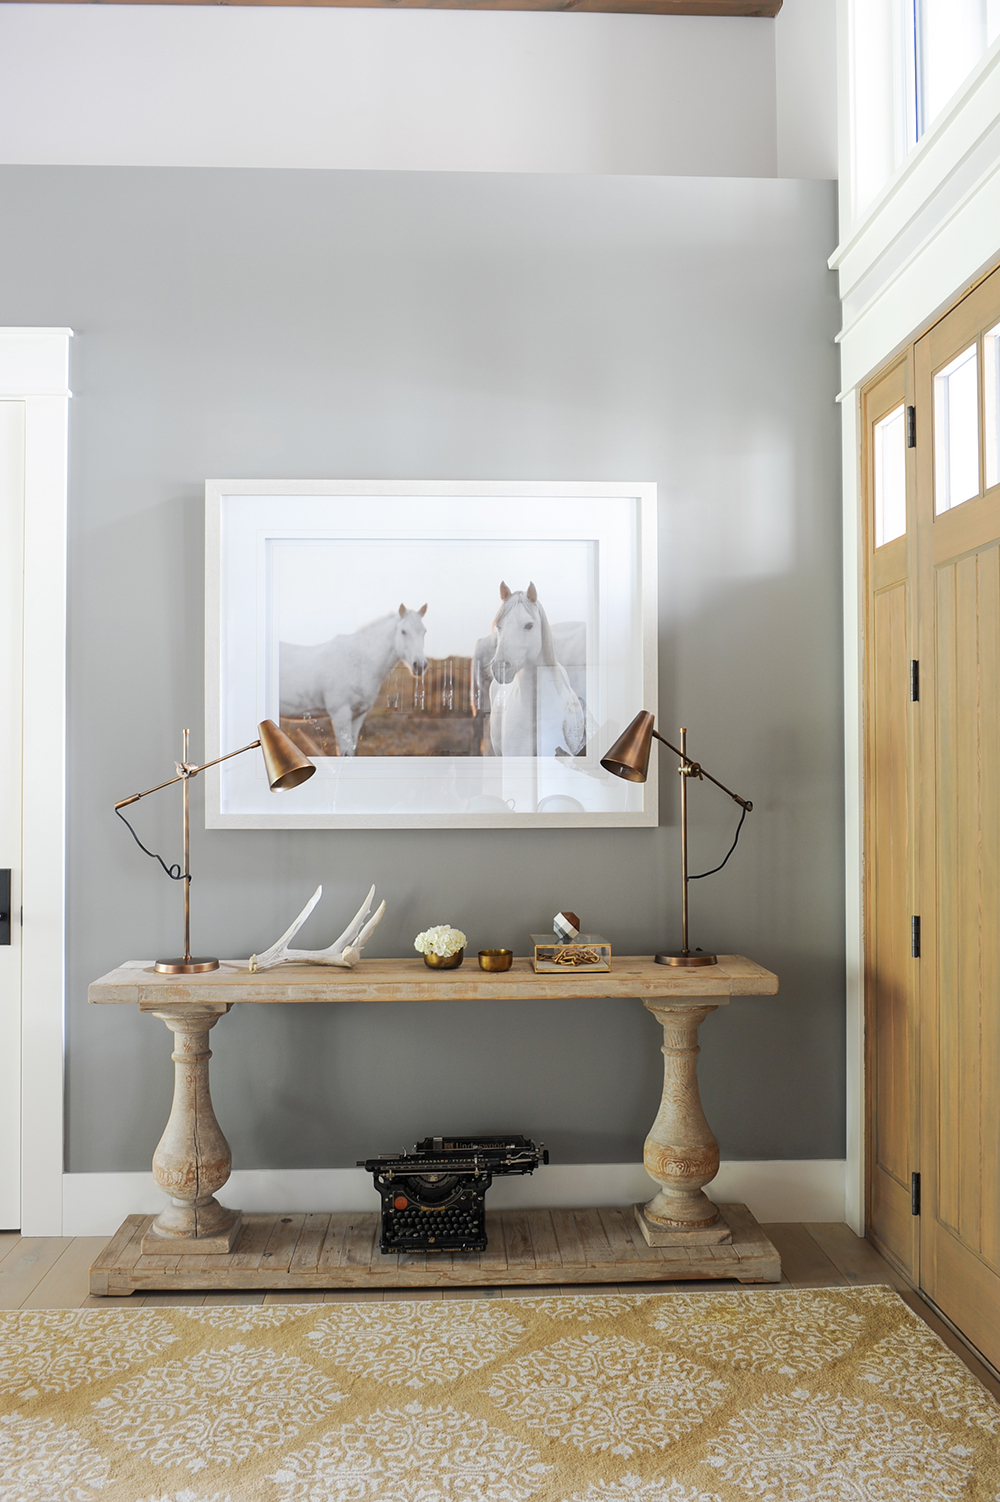 The front hall encapsulates the designers vision for a curated look.